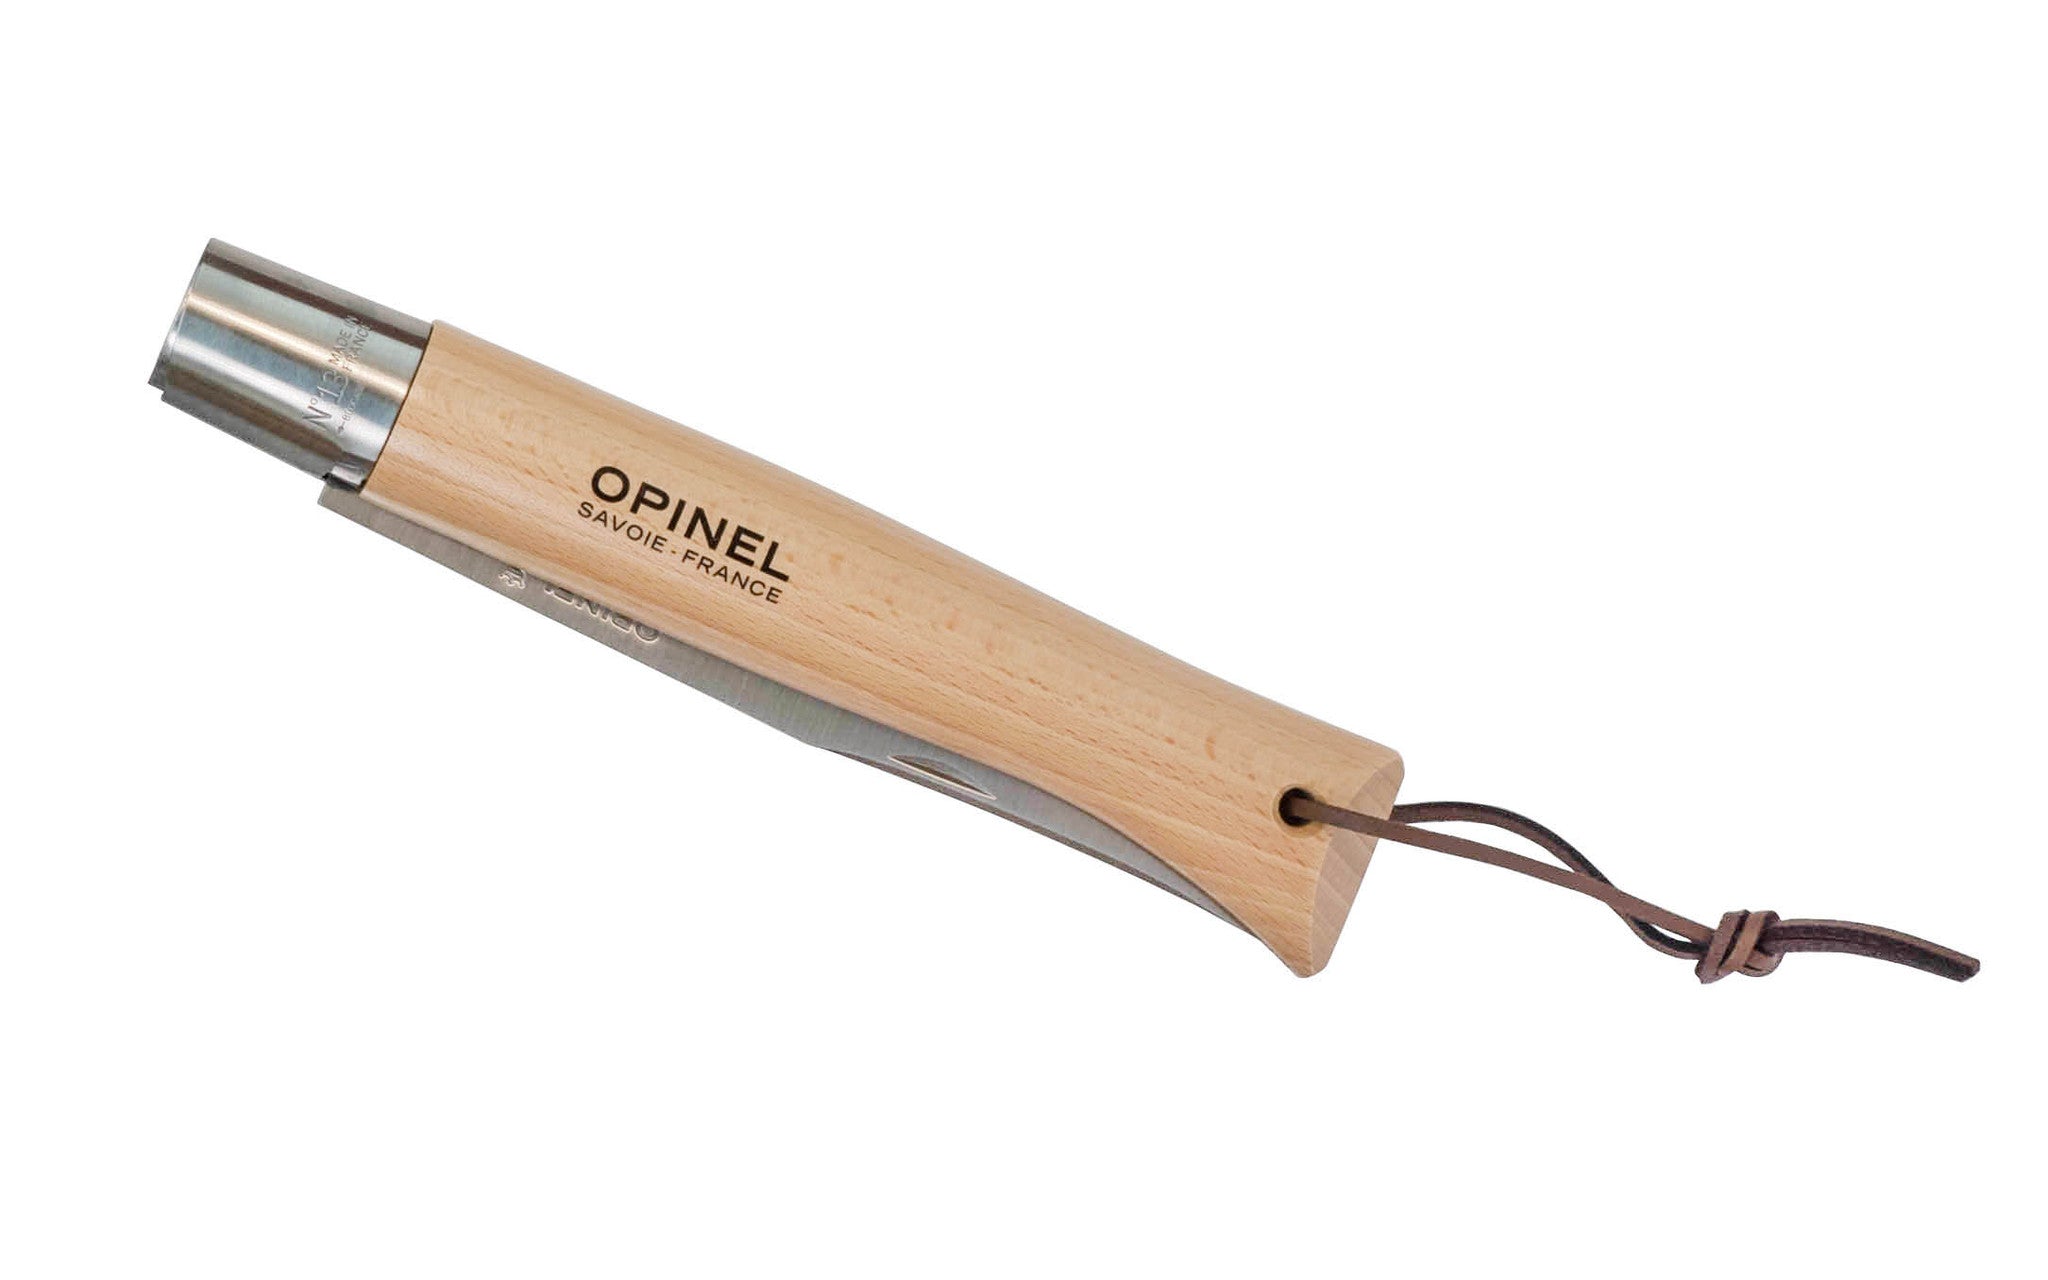 Giant Opinel Knife No. 13 Size ~ Folded Position